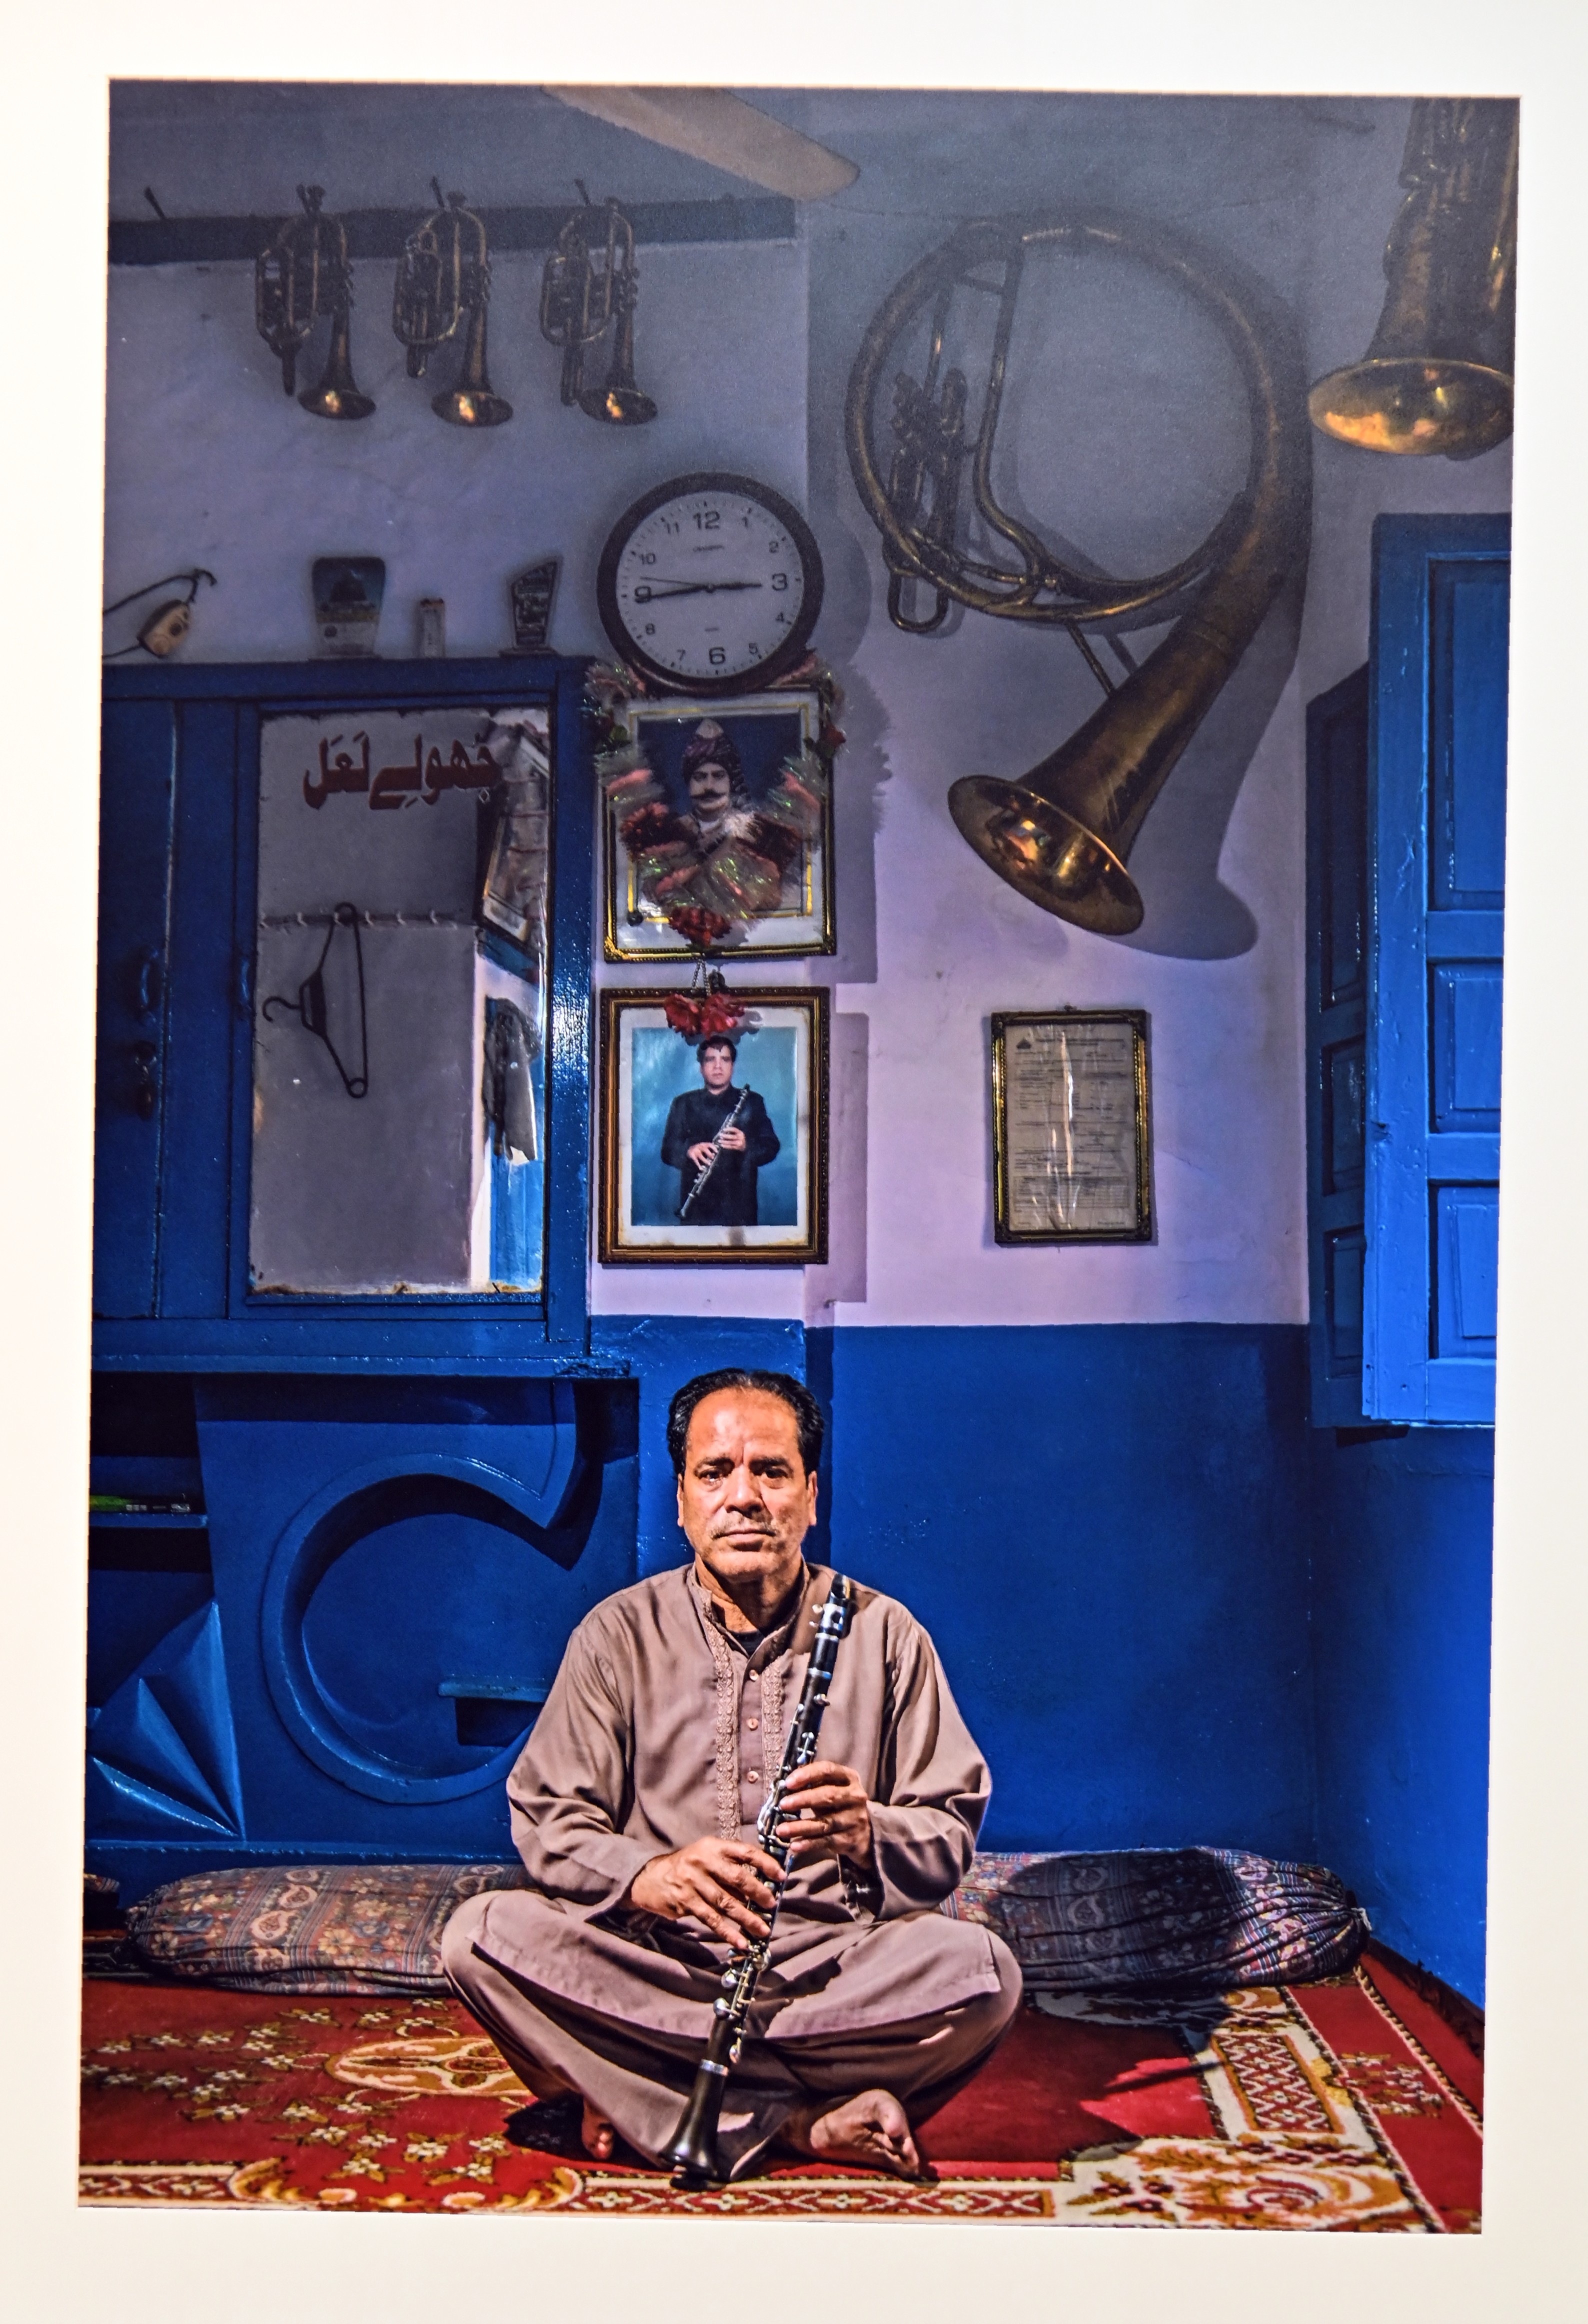 A picture of a musician shop displayed at PNCA, under the theme of Retelling the Story of Pakistani Photographers’ Journey